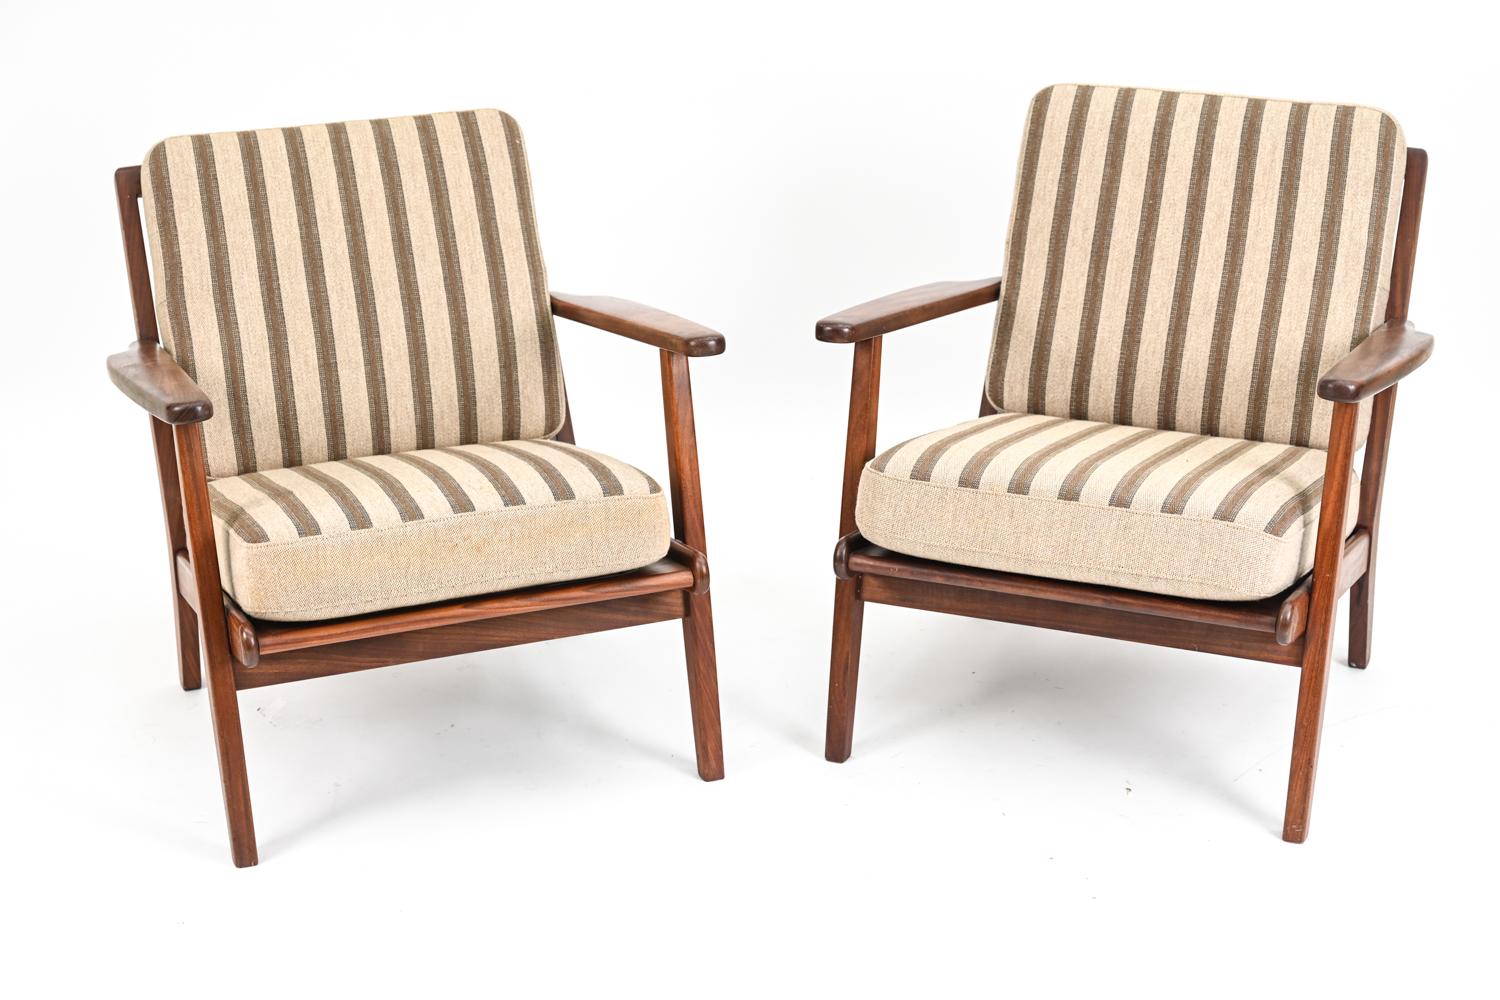 A handsome pair of Danish mid-century lounge chairs in the manner of Hans J. Wegner for GETAMA. These chairs feature dark stained teak frames and striped neutral wool cushions. 
No manufacturer's labels present.